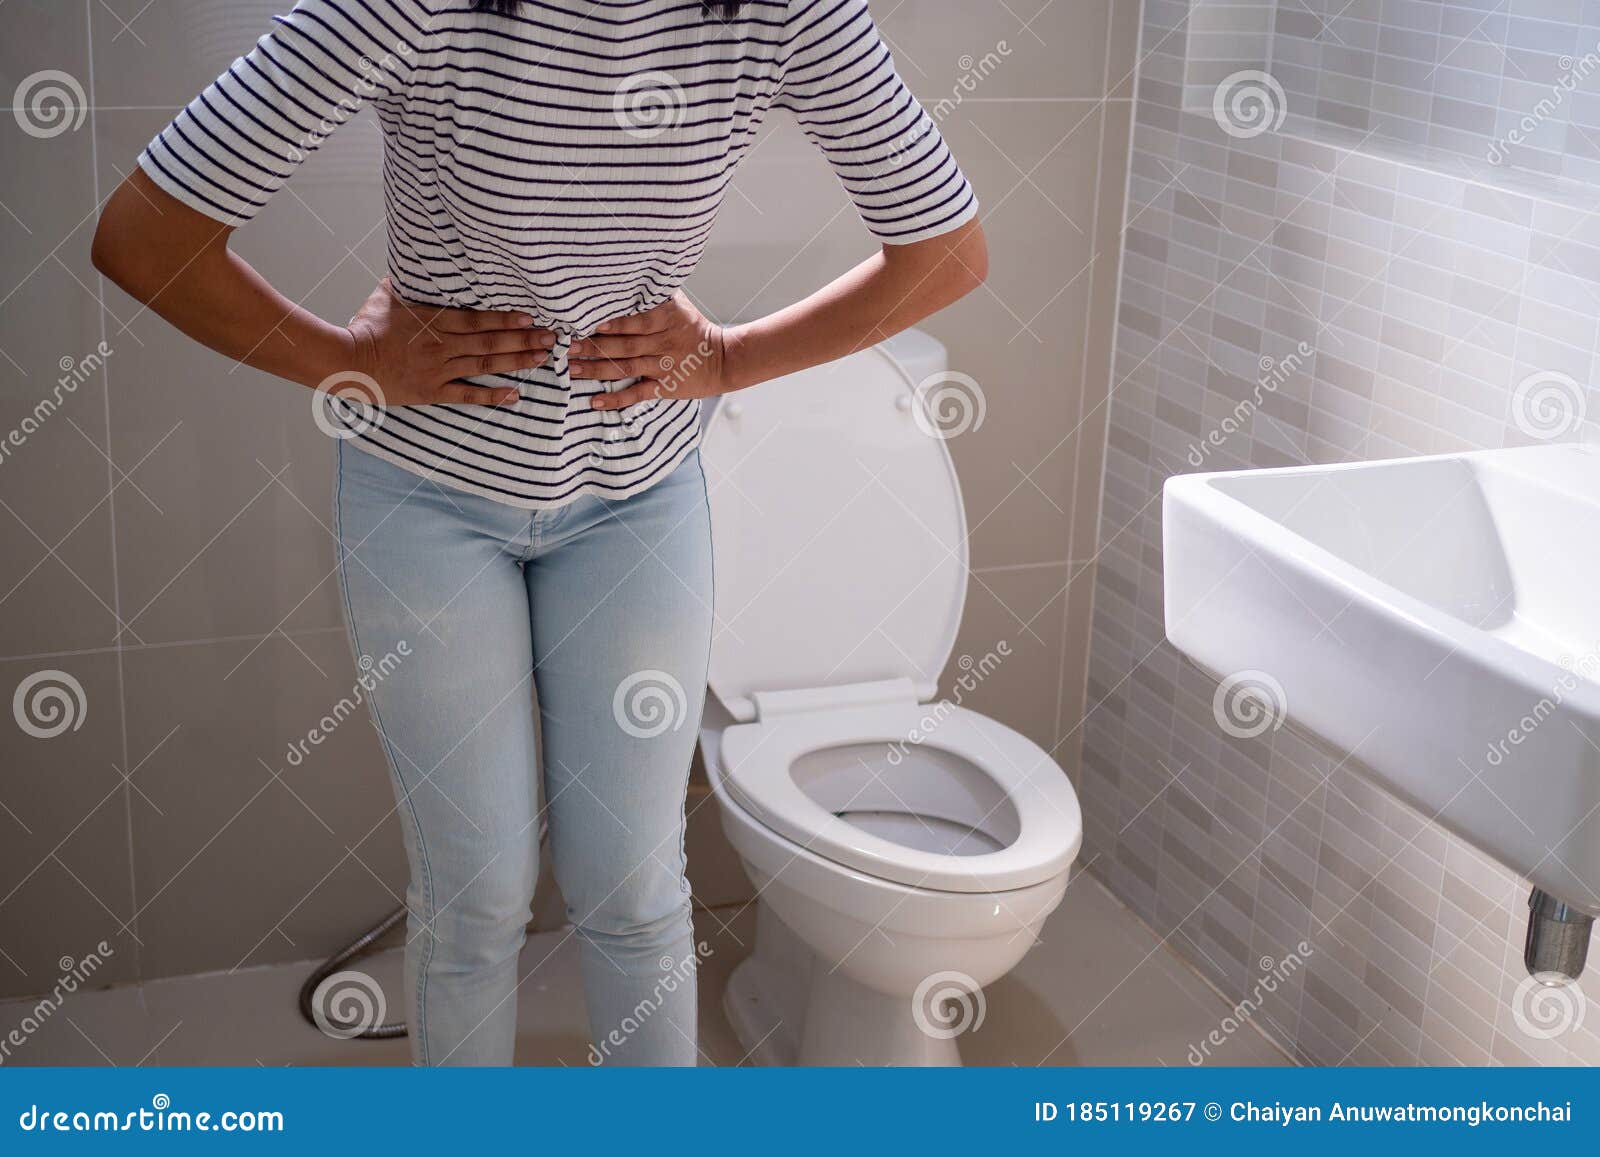 Woman Stood In The Bathroom In The Toilet With Severe Diarrhea Use